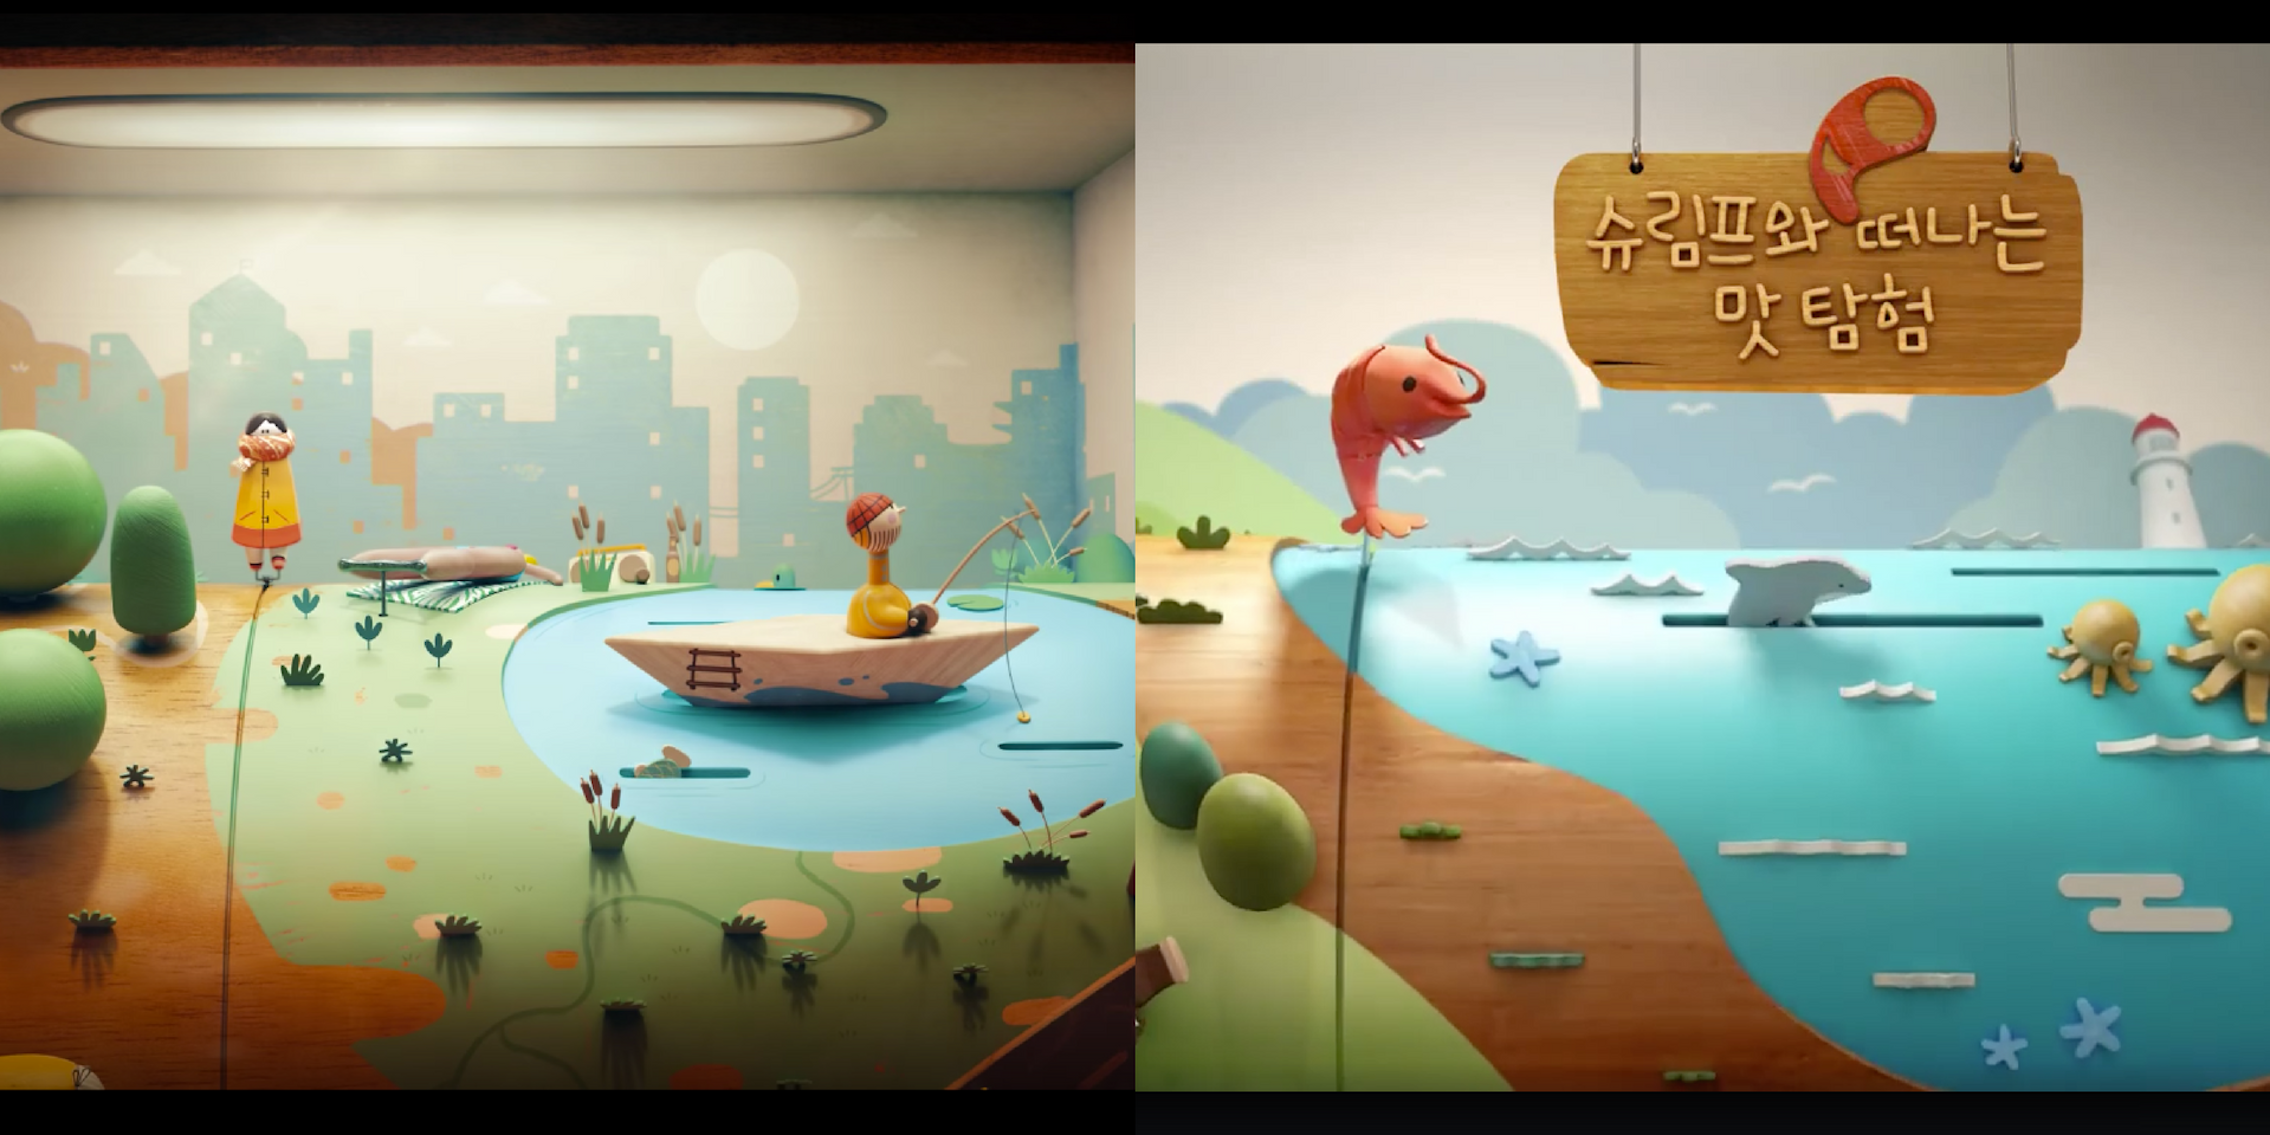 A side-by-side comparison of stills from the music video for 'Ma'agalim' by Jane Bourdaoux directed by Uri Lotan, and an advertisement for McDonald's South Korea.